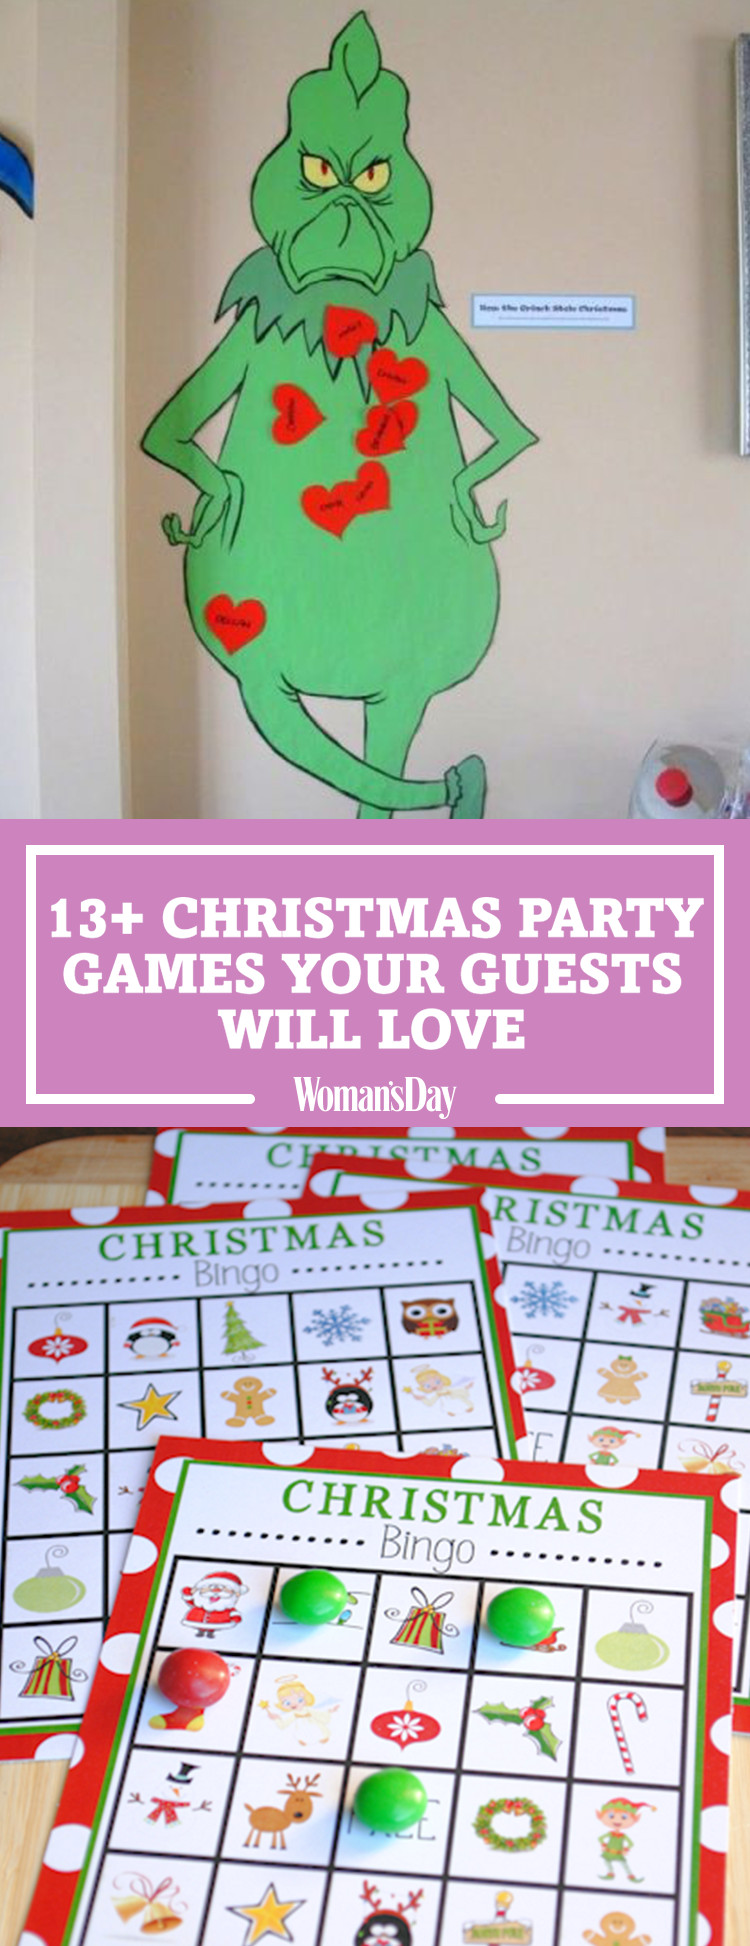 Christmas Game Ideas
 17 Fun Christmas Party Games for Kids DIY Holiday Party